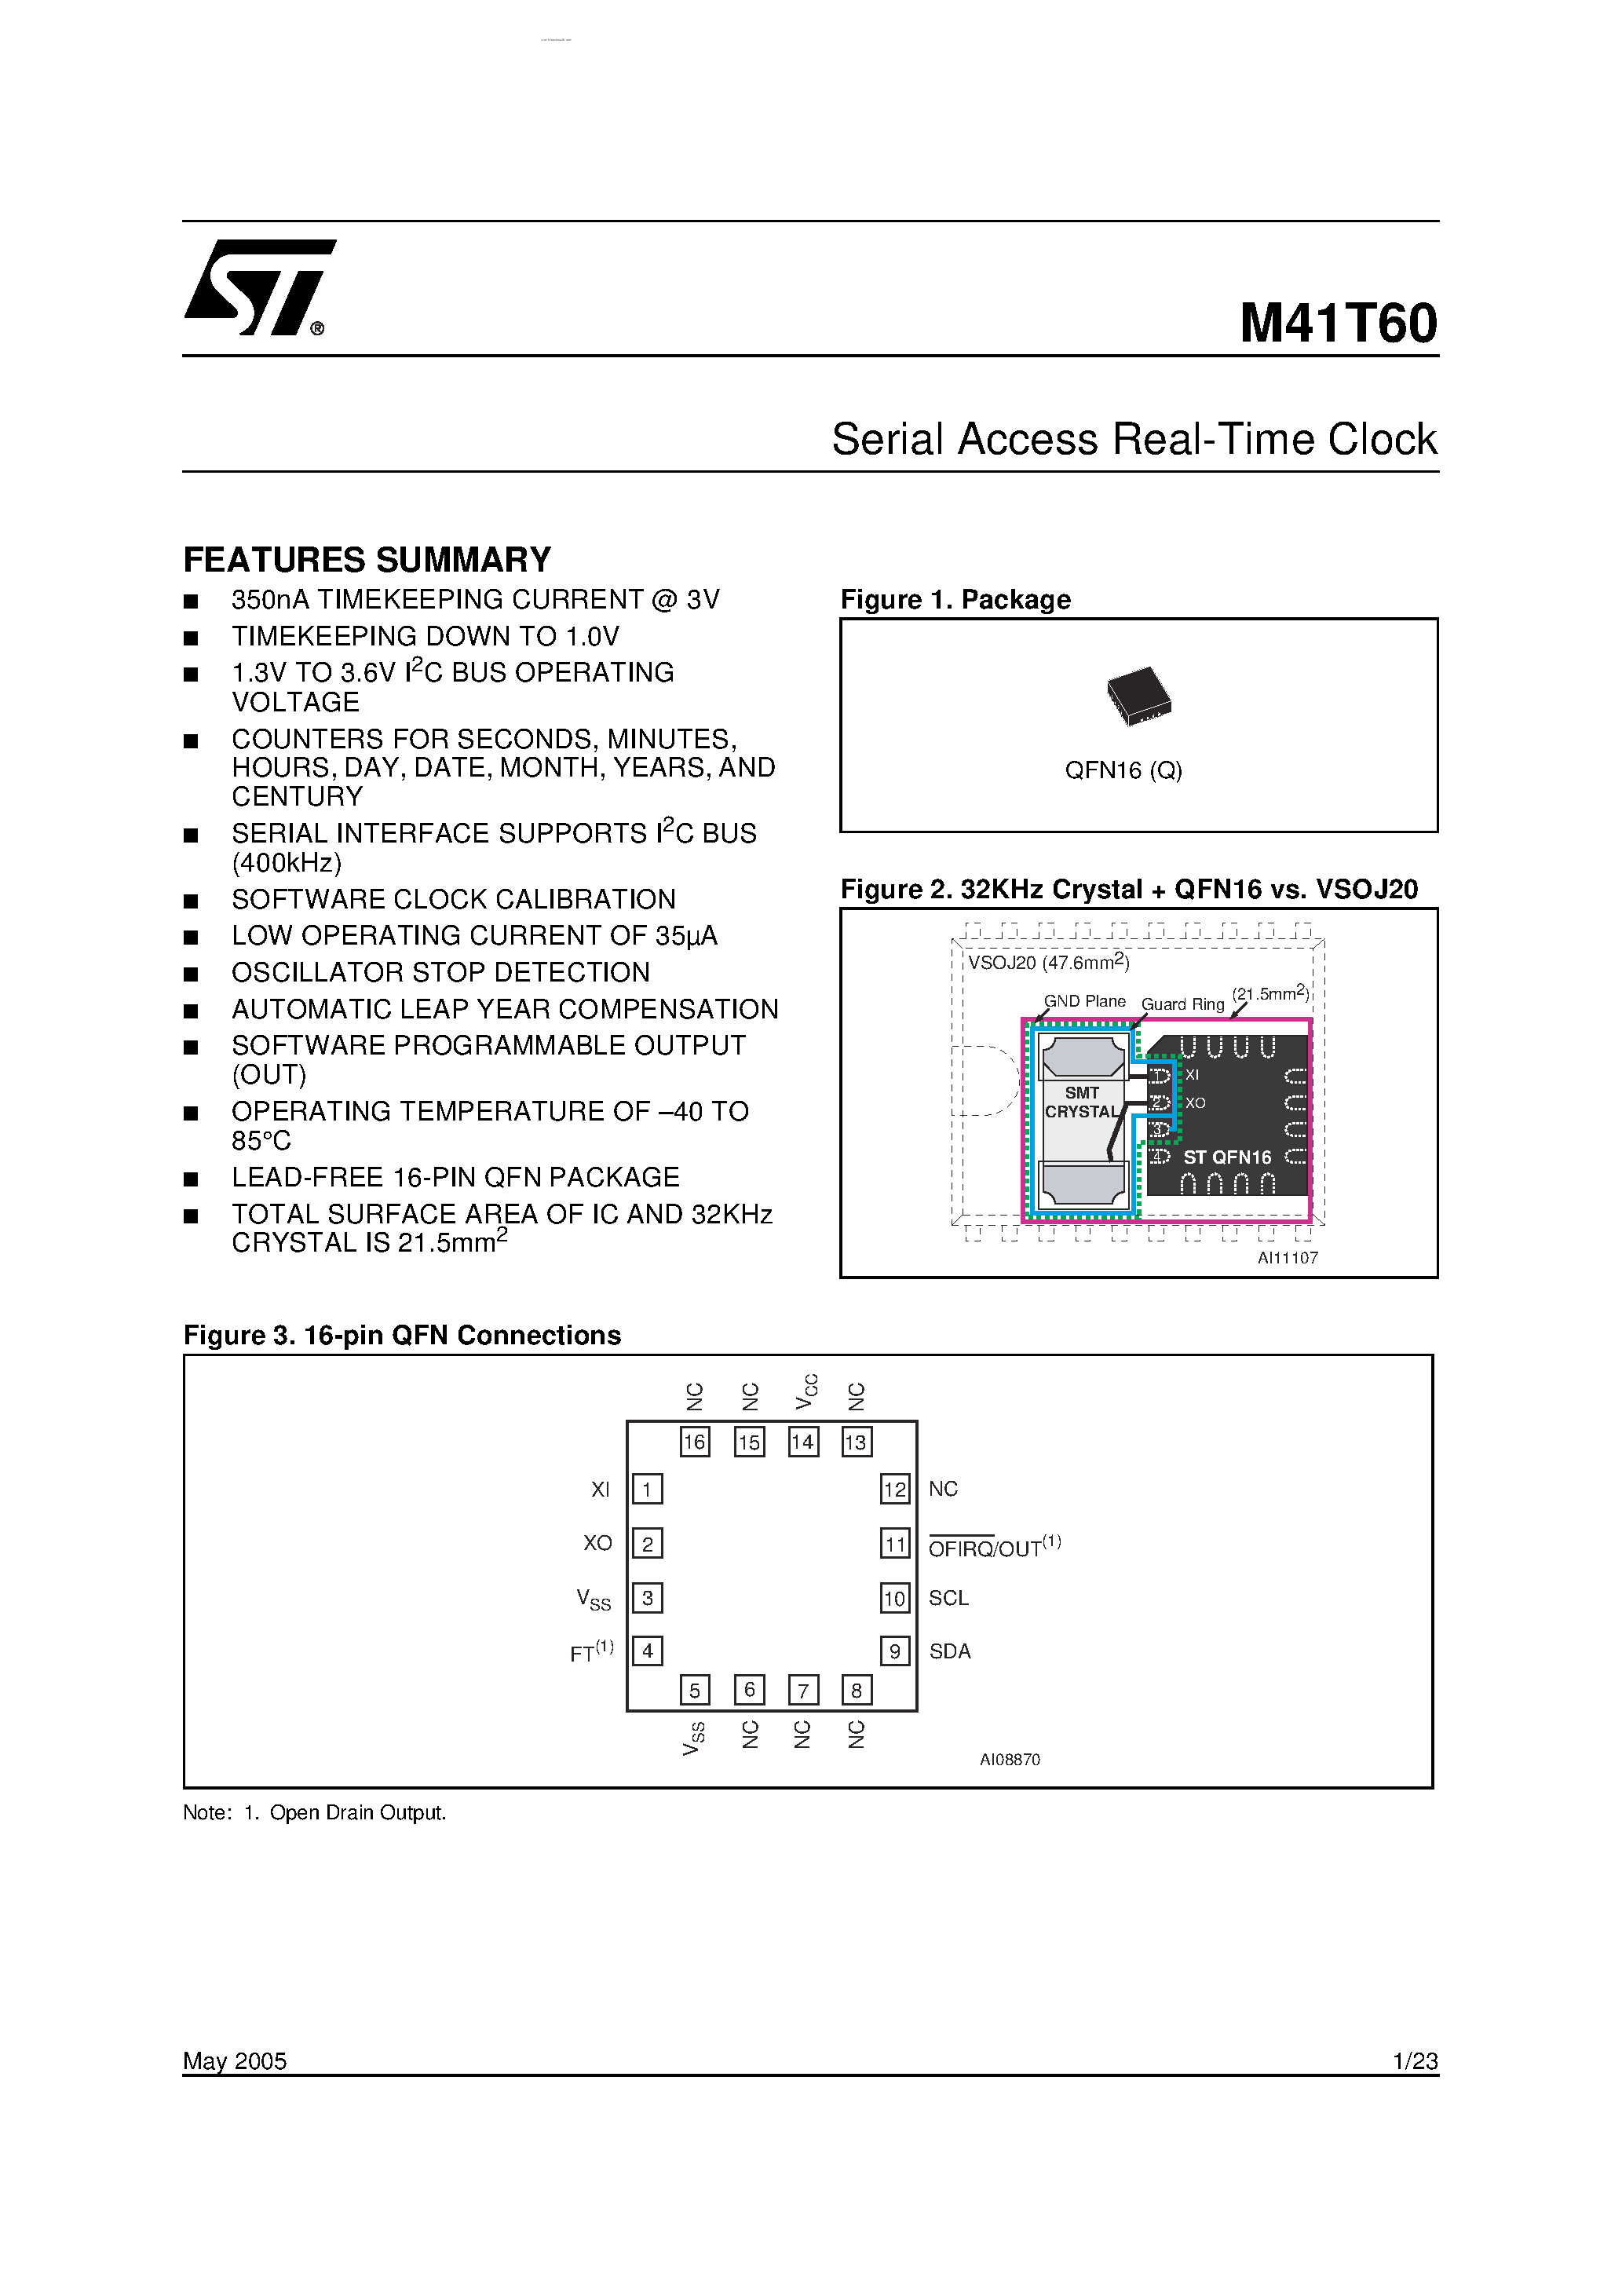 Datasheet M41T60 - Serial Access Real-Time Clock page 1